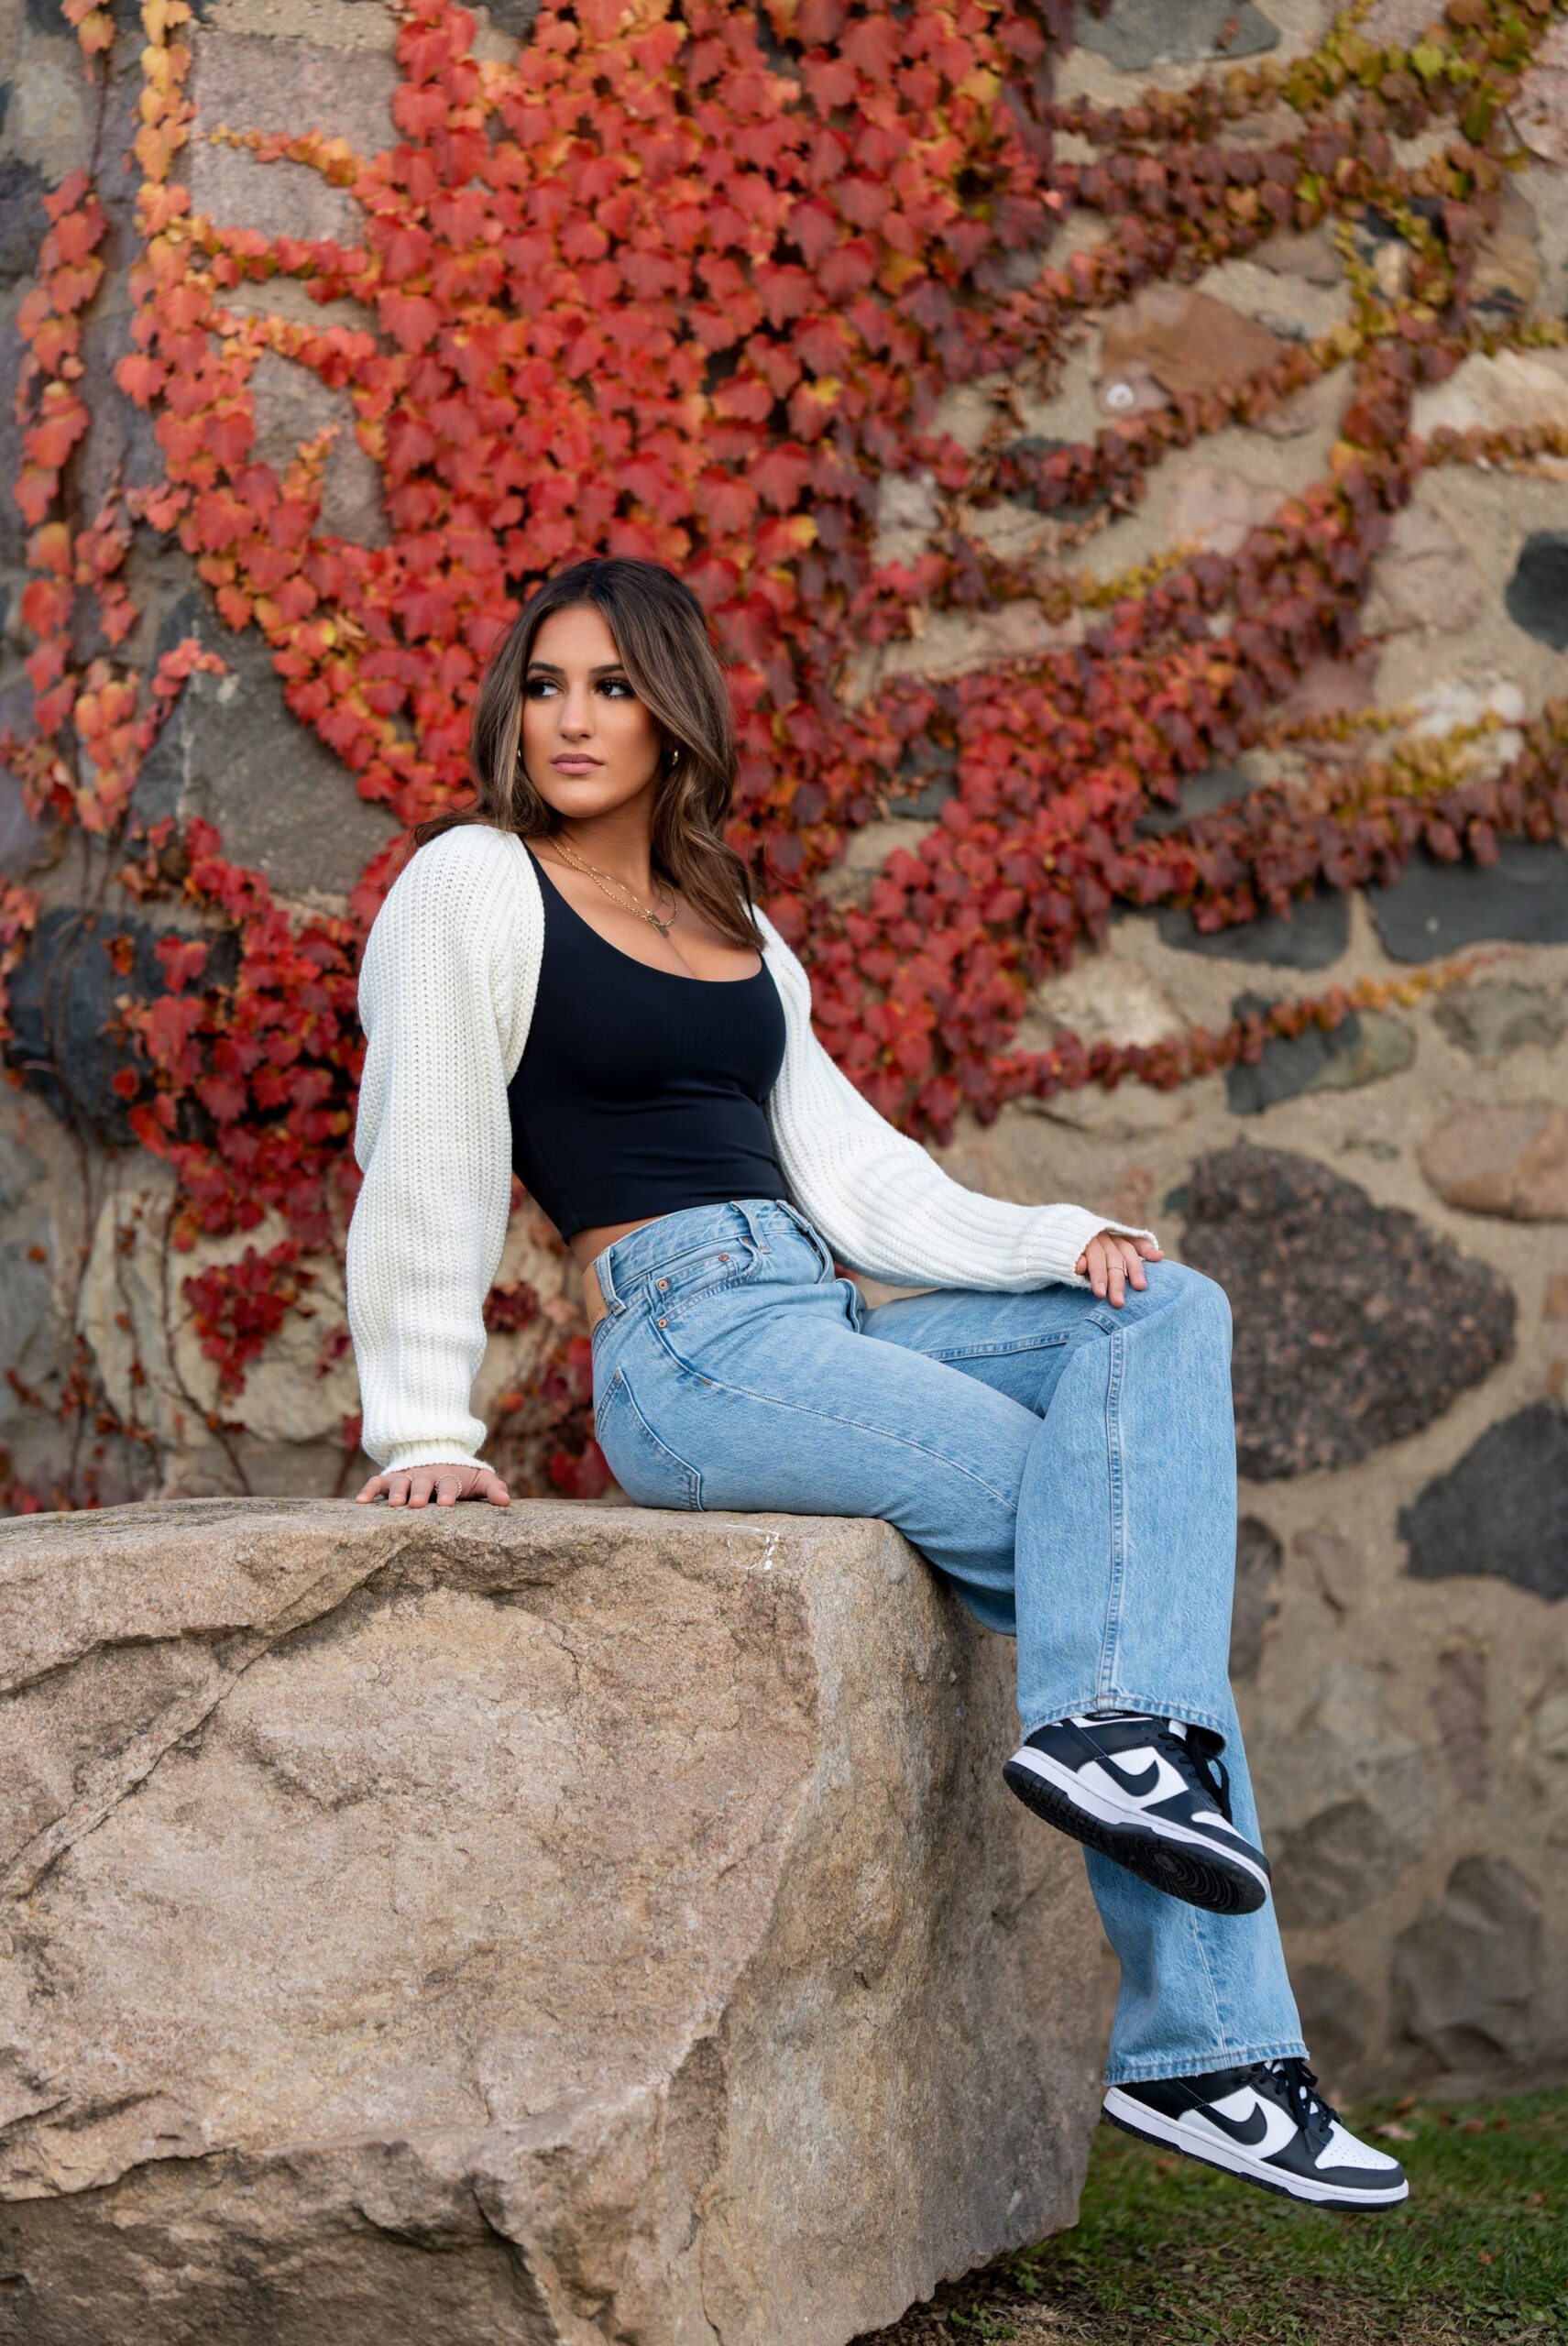 Sitting on a rock with a red leafed vine behind her, a high schooler poses for her senior photos at Van Hoosen.